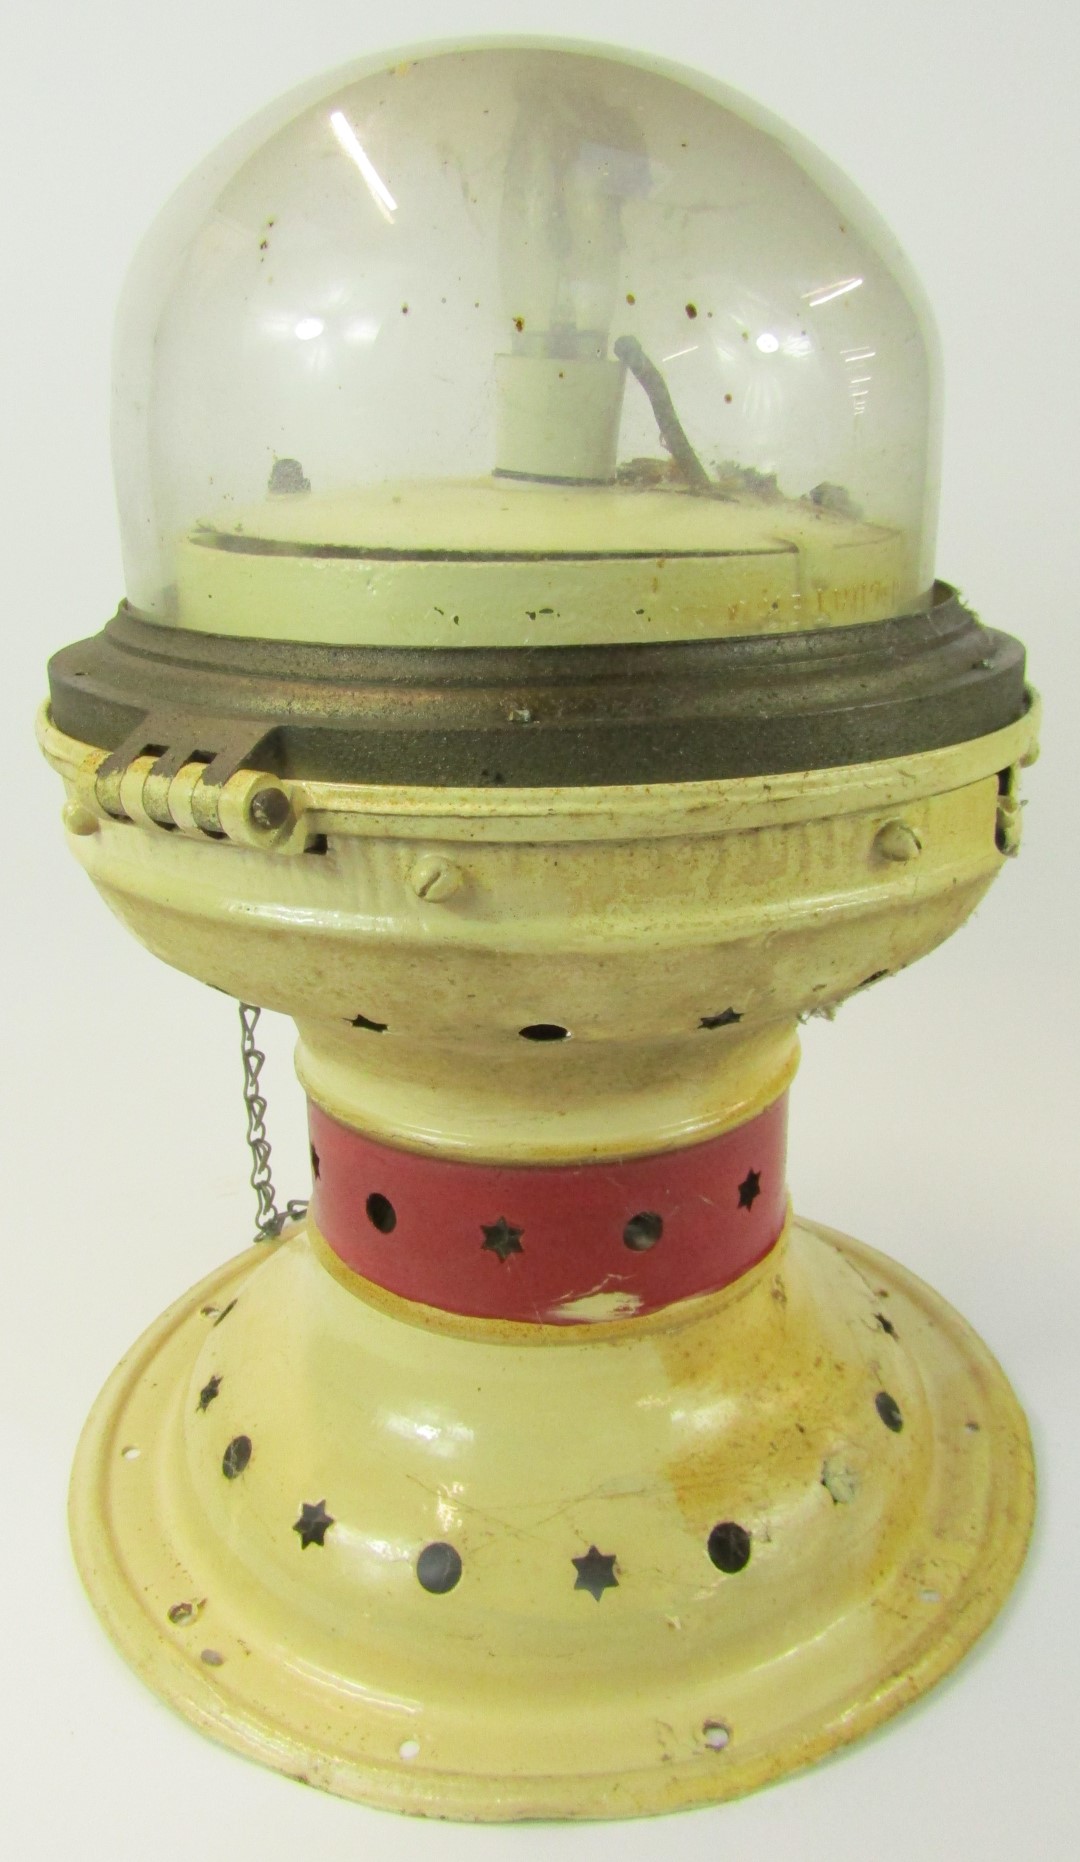 An early 20thC GWR cast iron station lamp, converted to a table lamp, with a hinged glass dome cover - Image 2 of 2